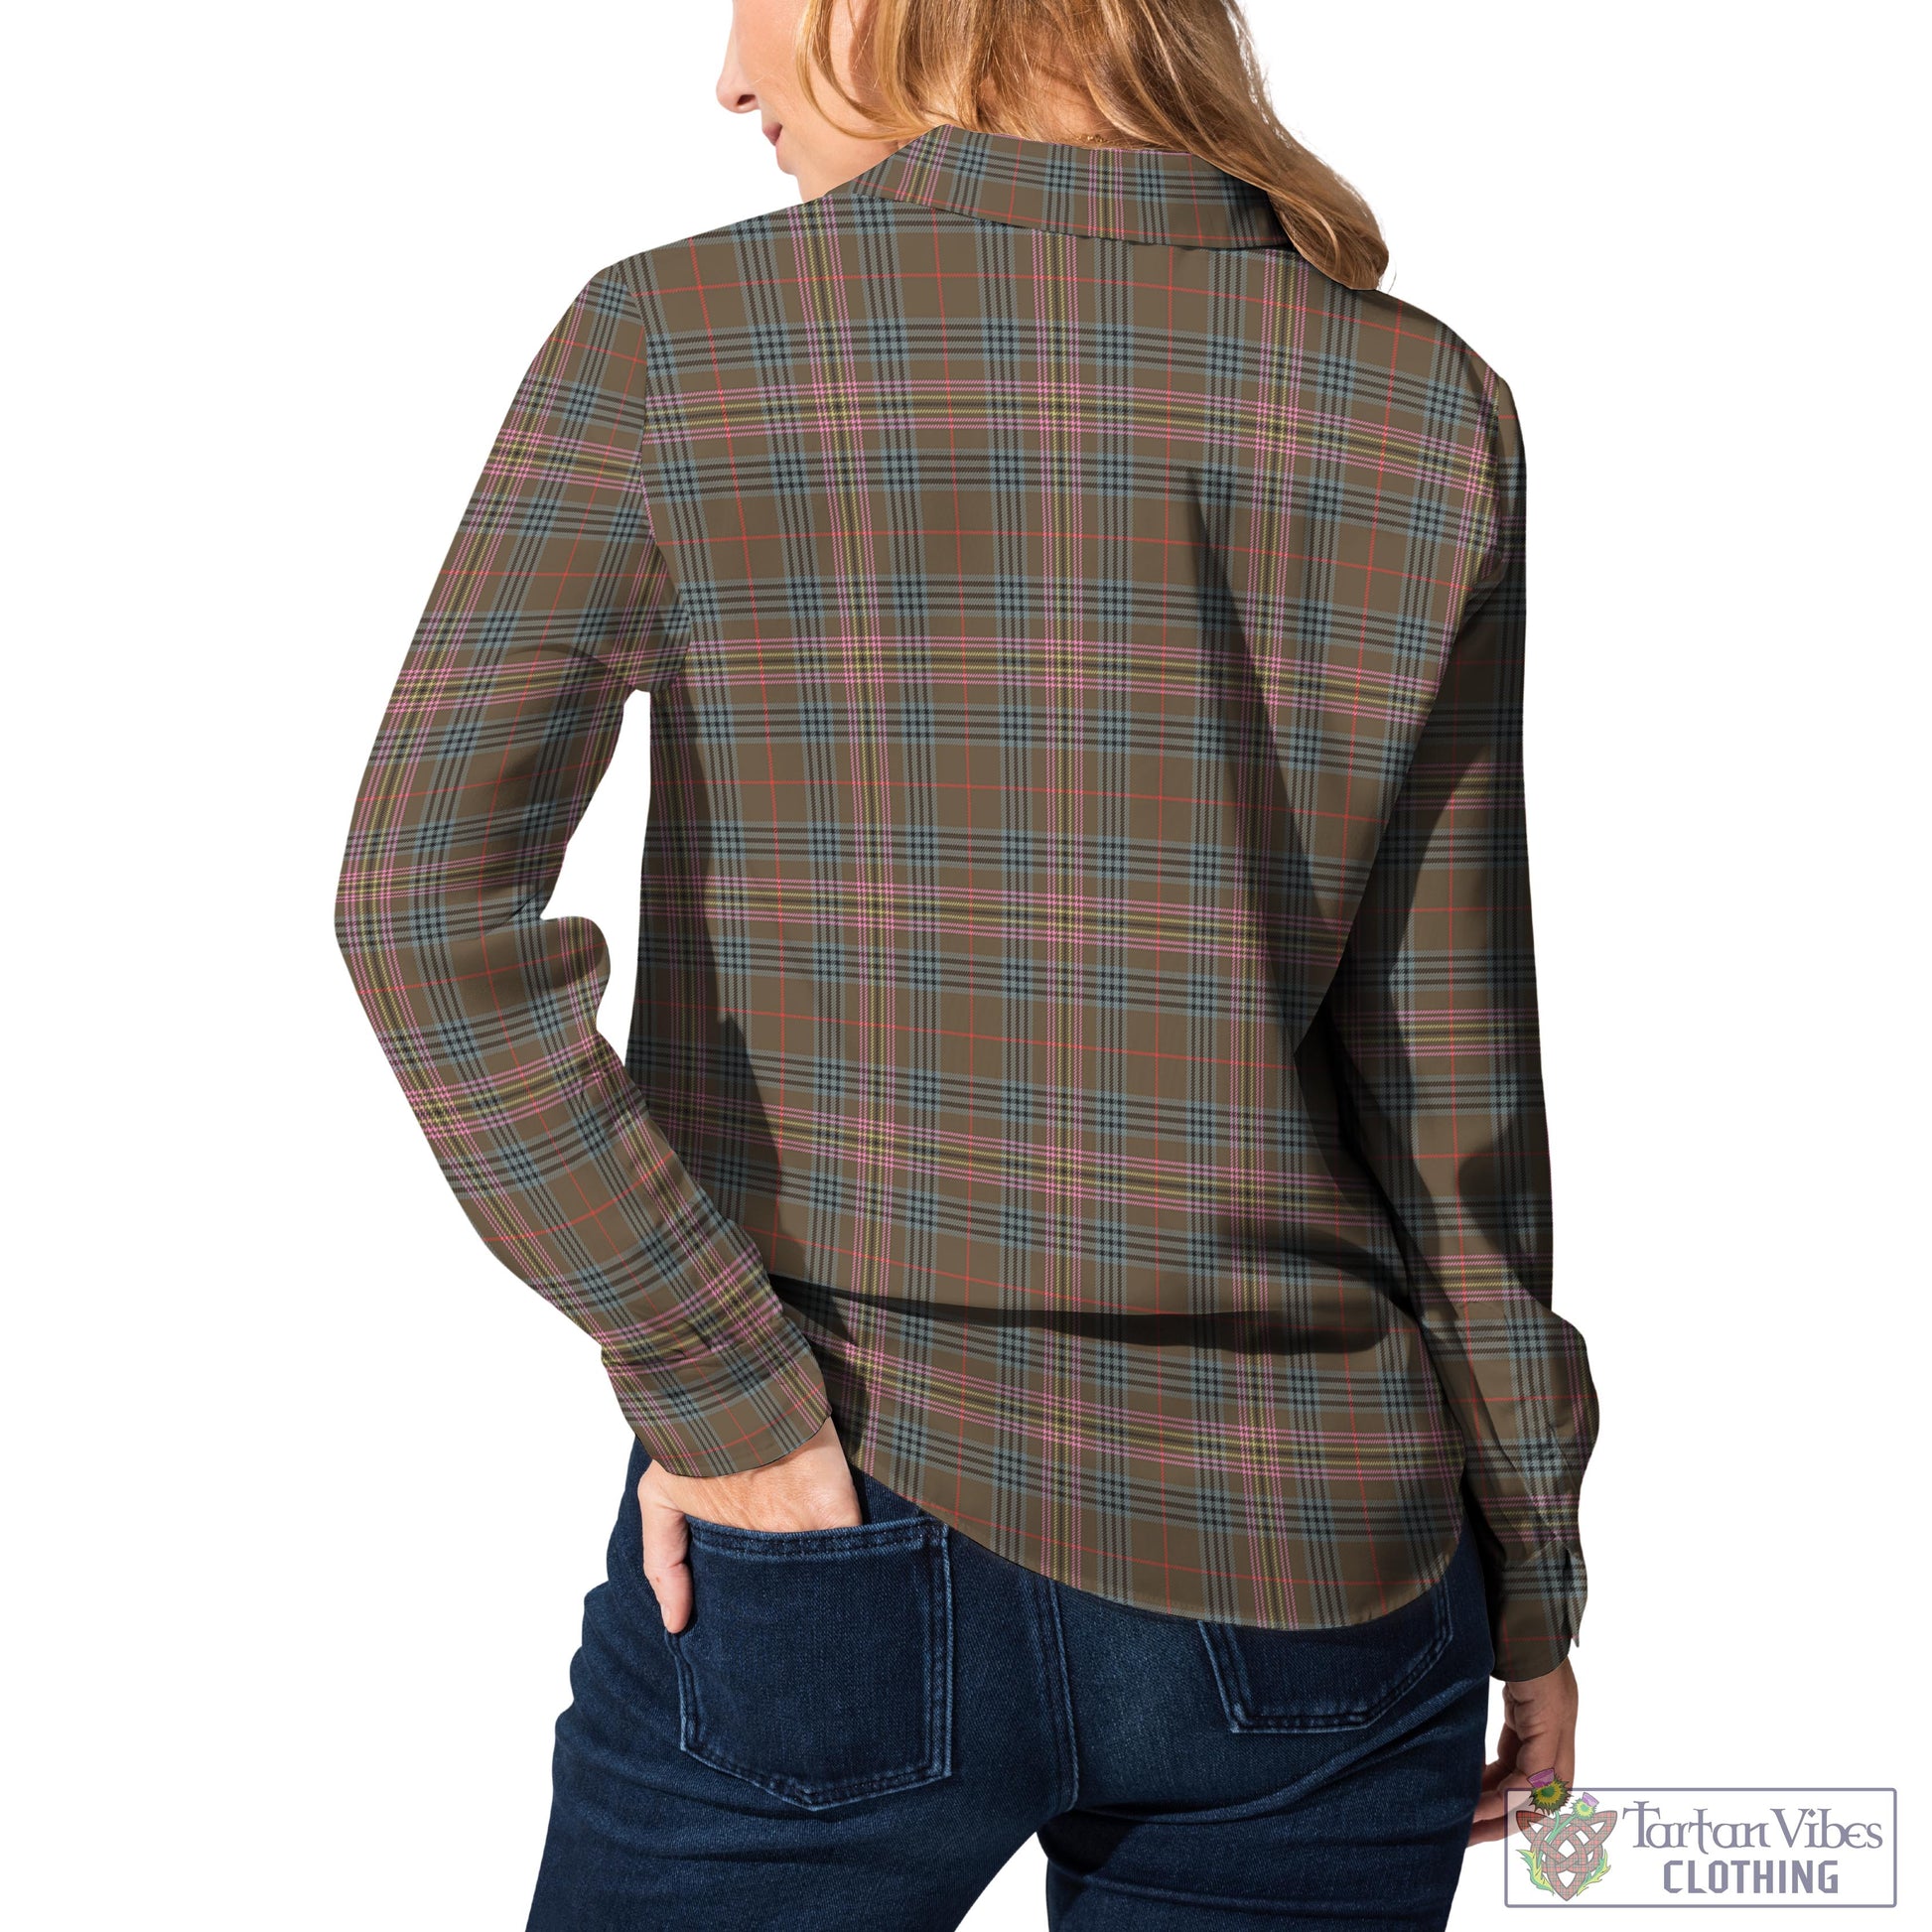 Tartan Vibes Clothing Kennedy Weathered Tartan Womens Casual Shirt with Family Crest